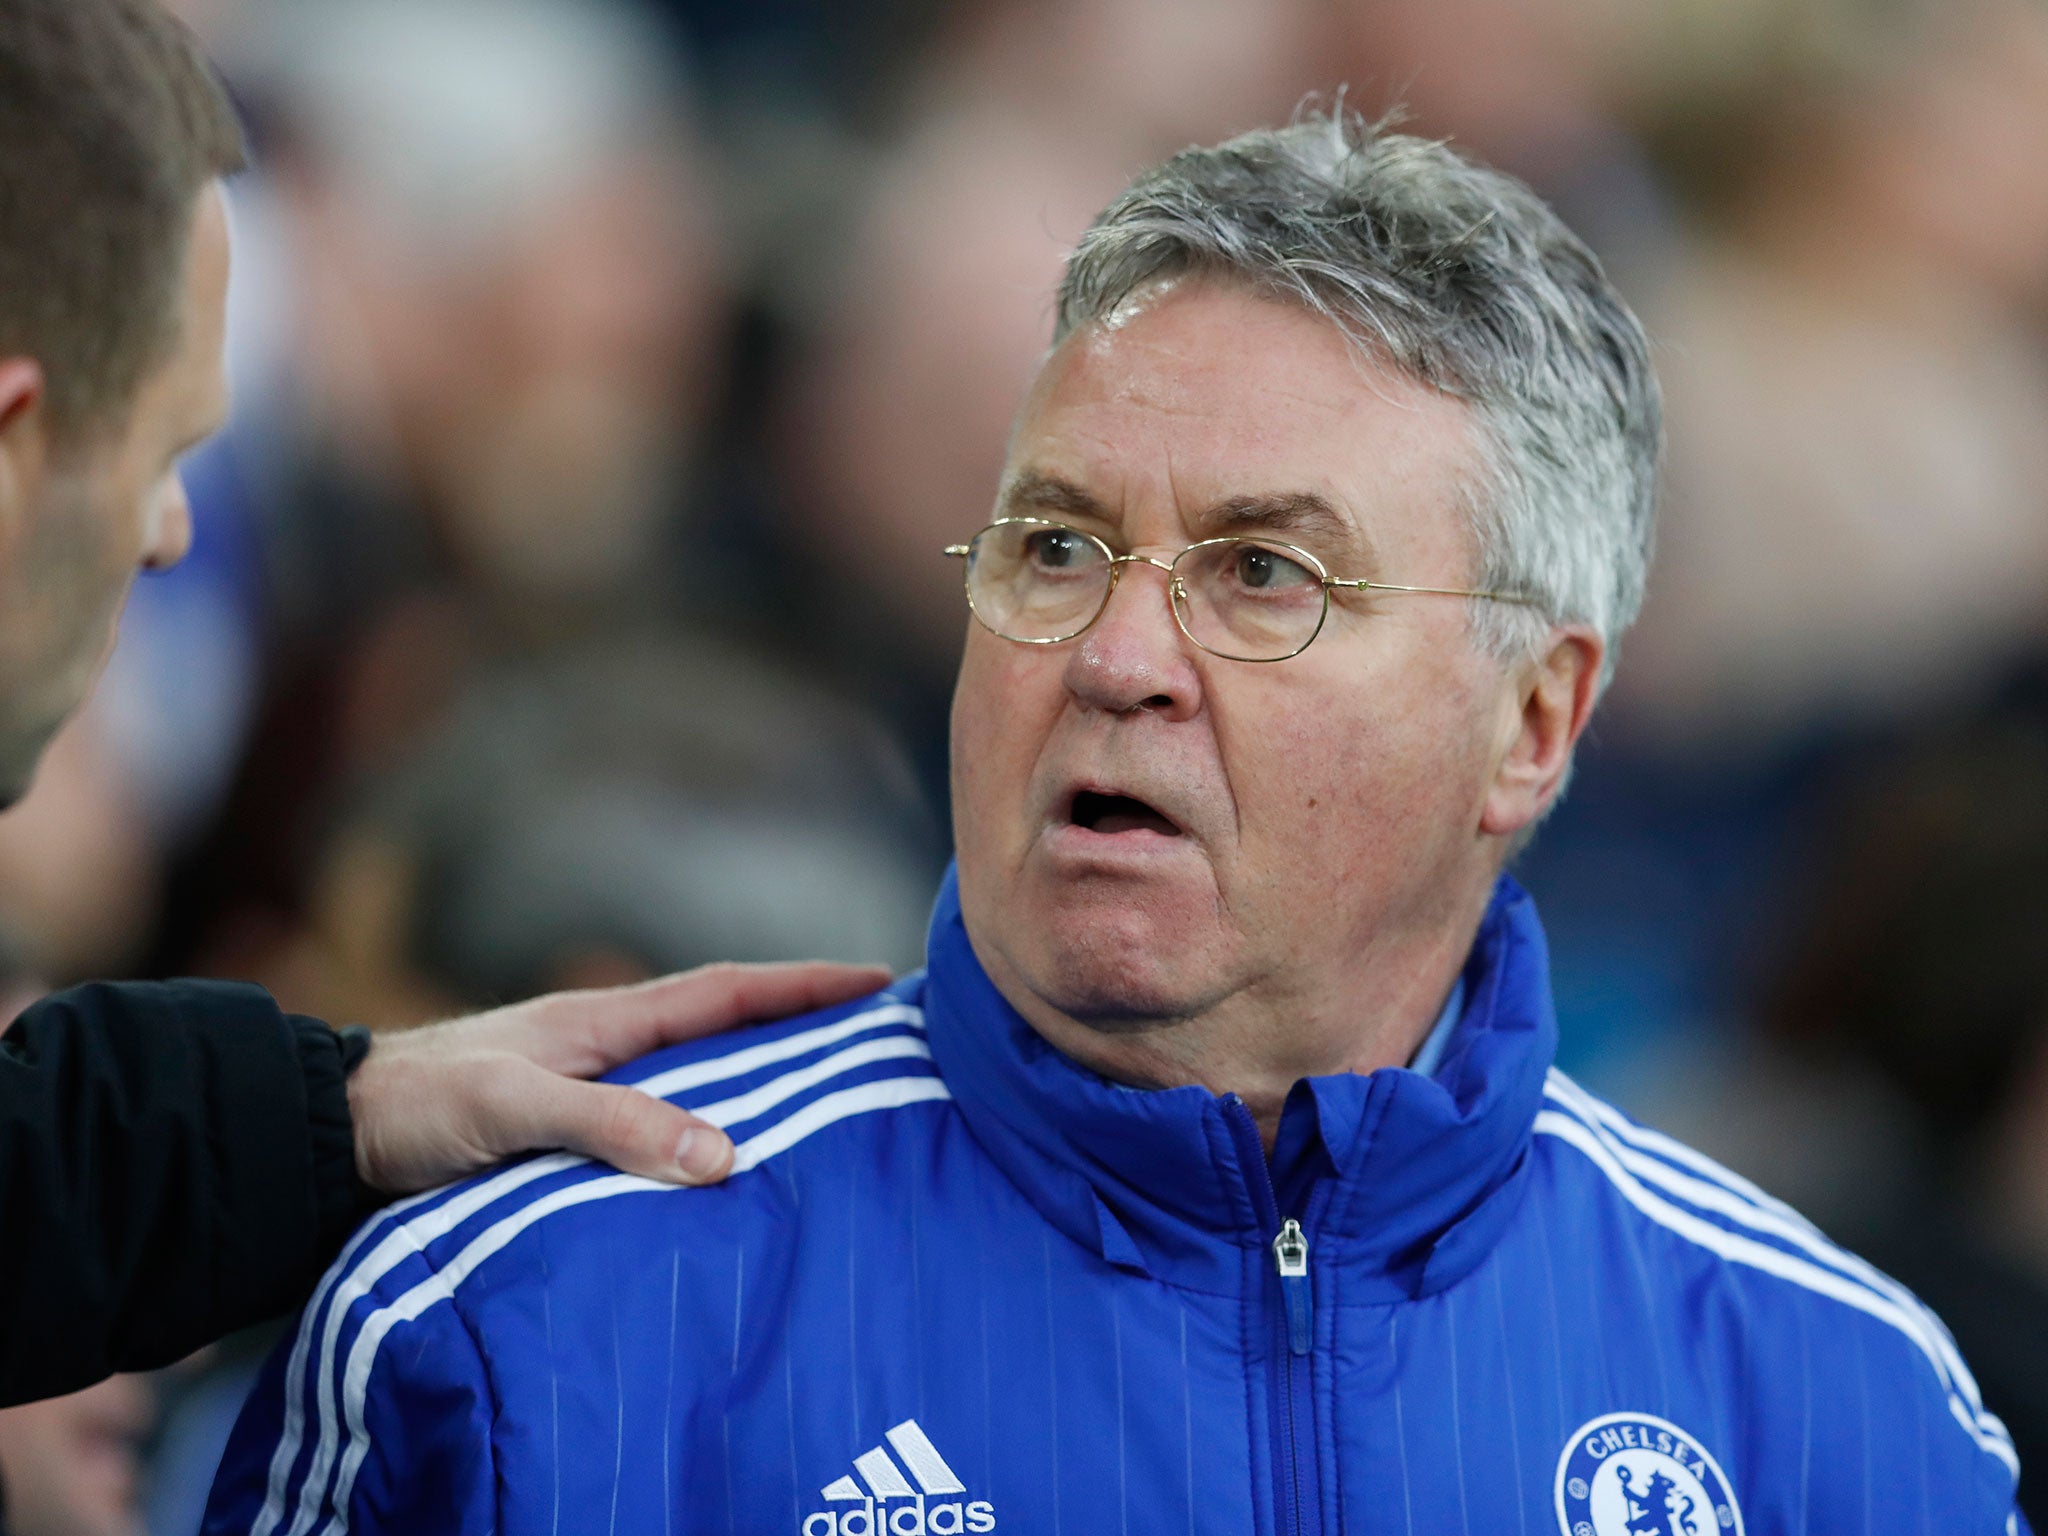 Chelsea manager Guus Hiddink during the Emirates FA Cup match at Goodison Park